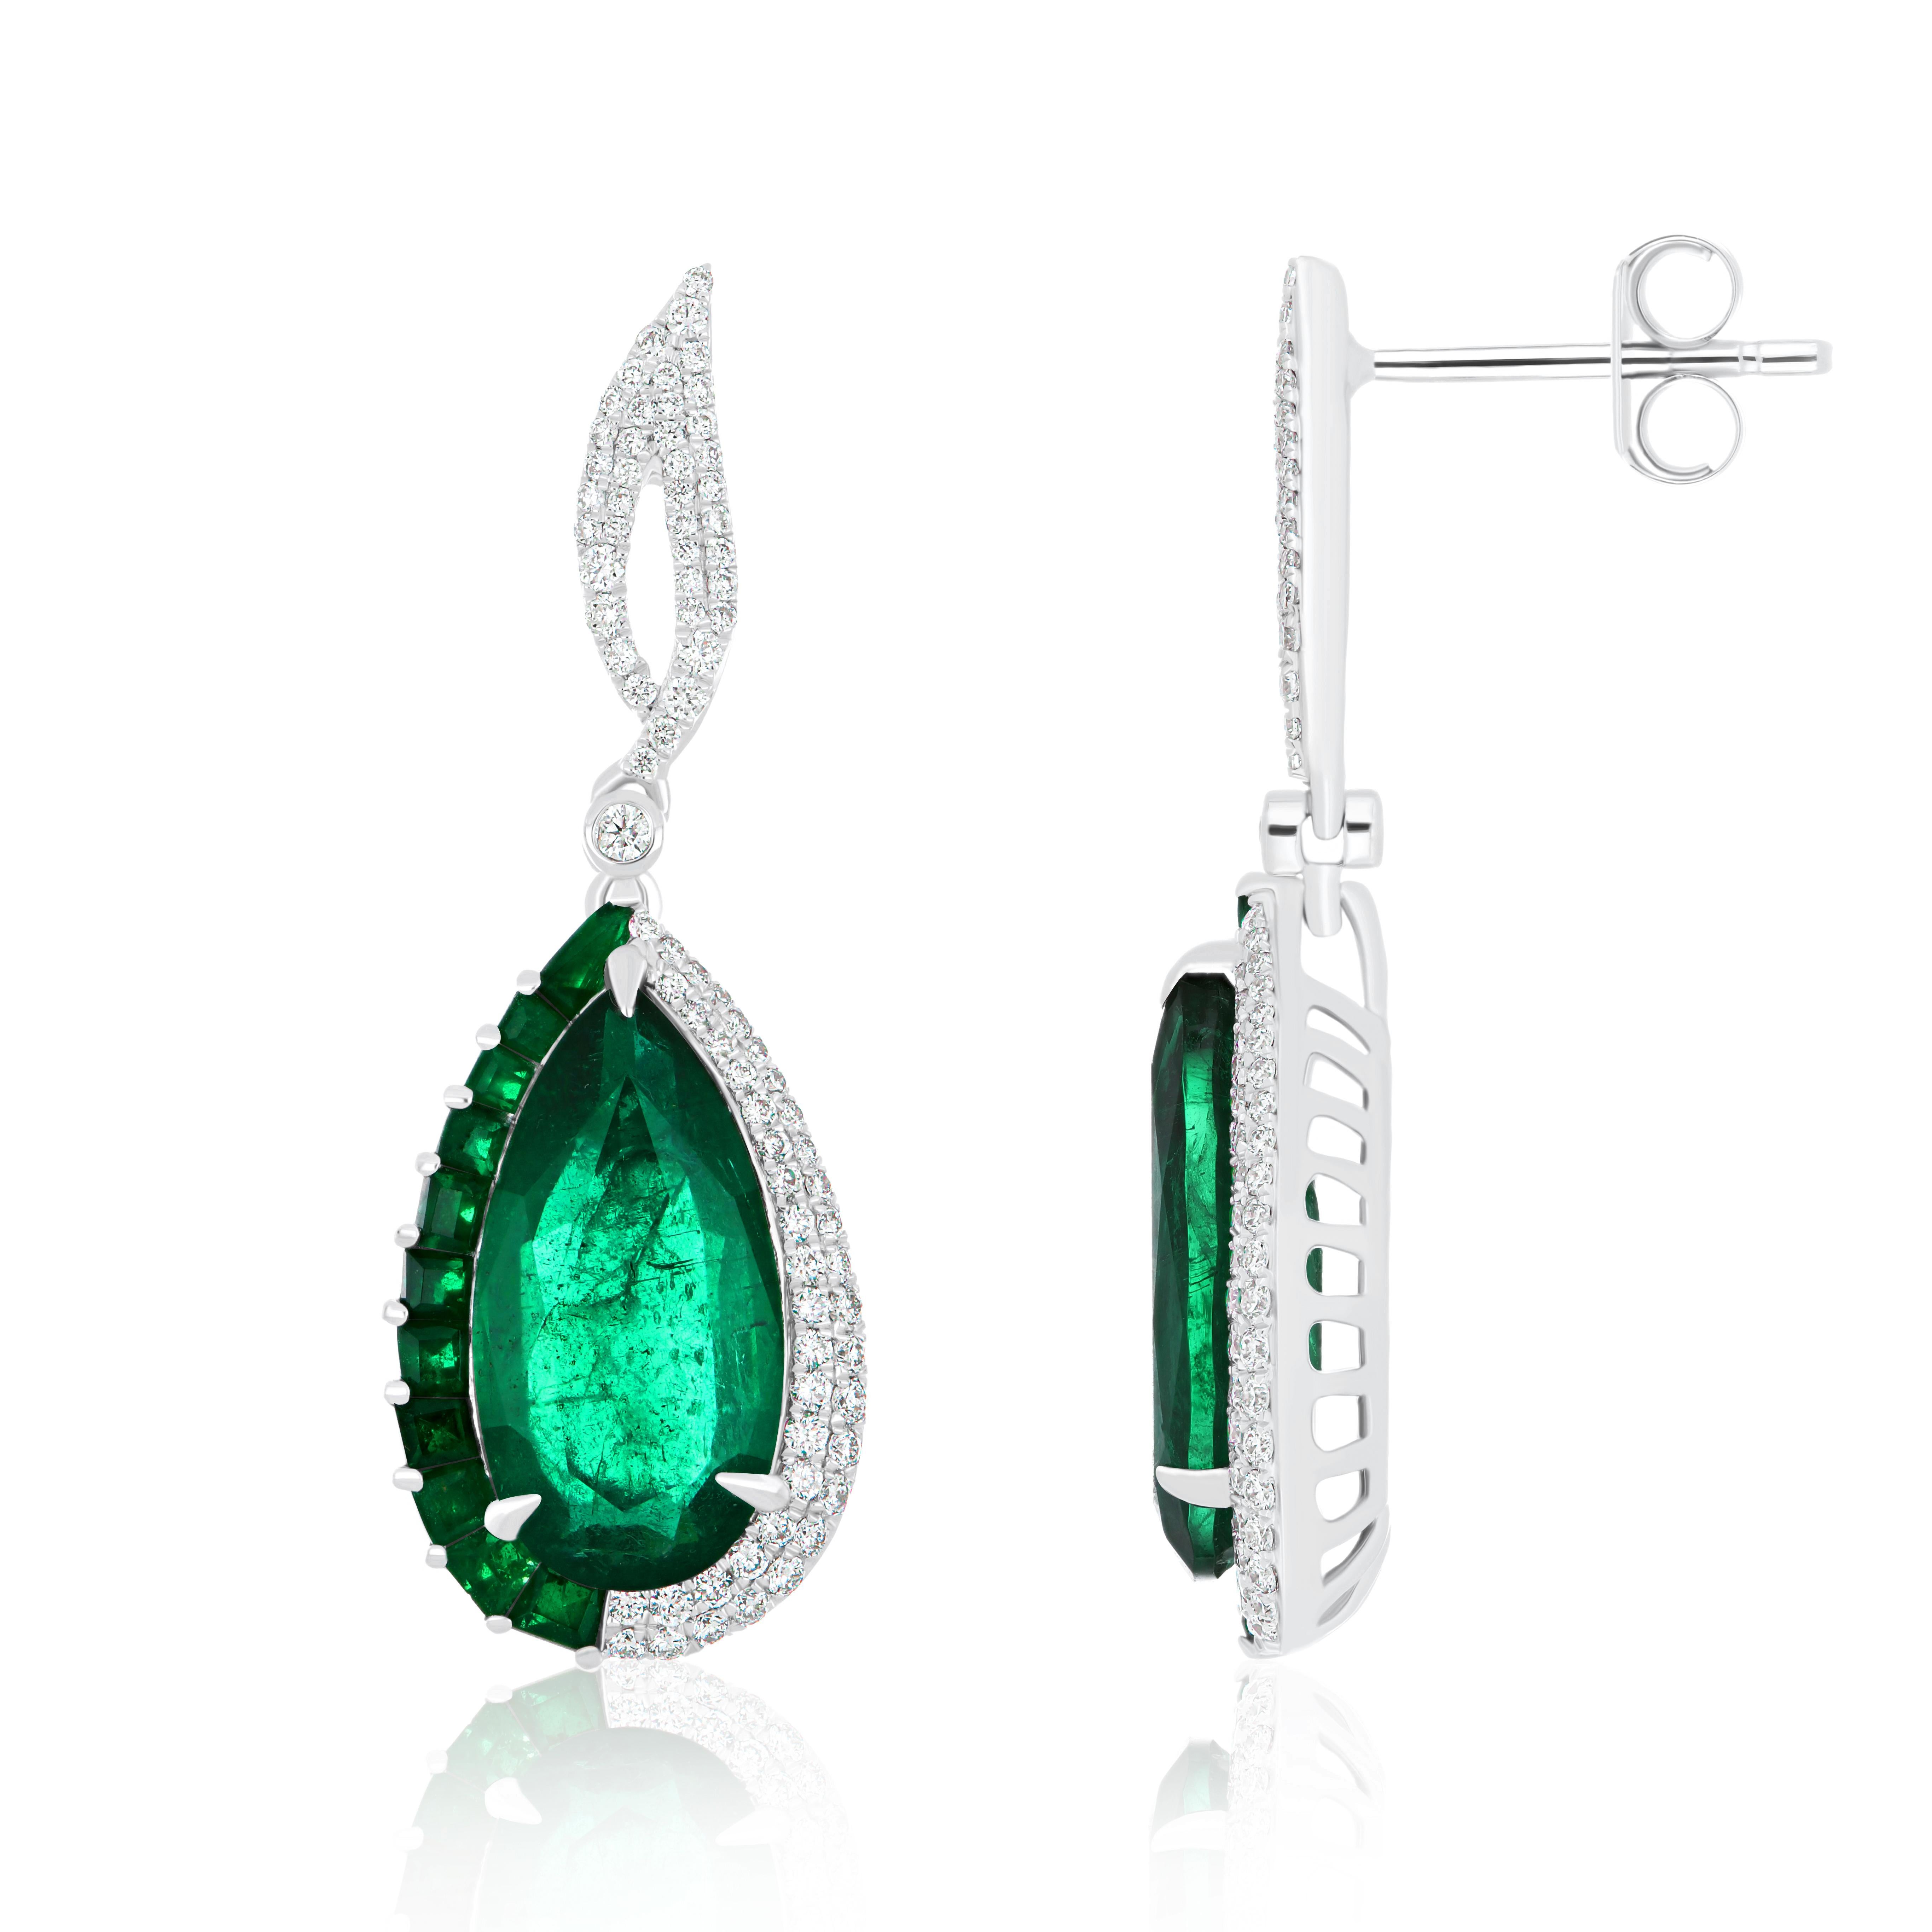 Elegant and Exquisitely detailed White Gold earrings, with 8.80CT's (total approx.) Emerald Pear Shape, accented with micro pave Diamonds, weighing approx.  0.64 CT's. (total approx.). total carat weight. Beautifully Hand-Crafted Earring in 18 Karat